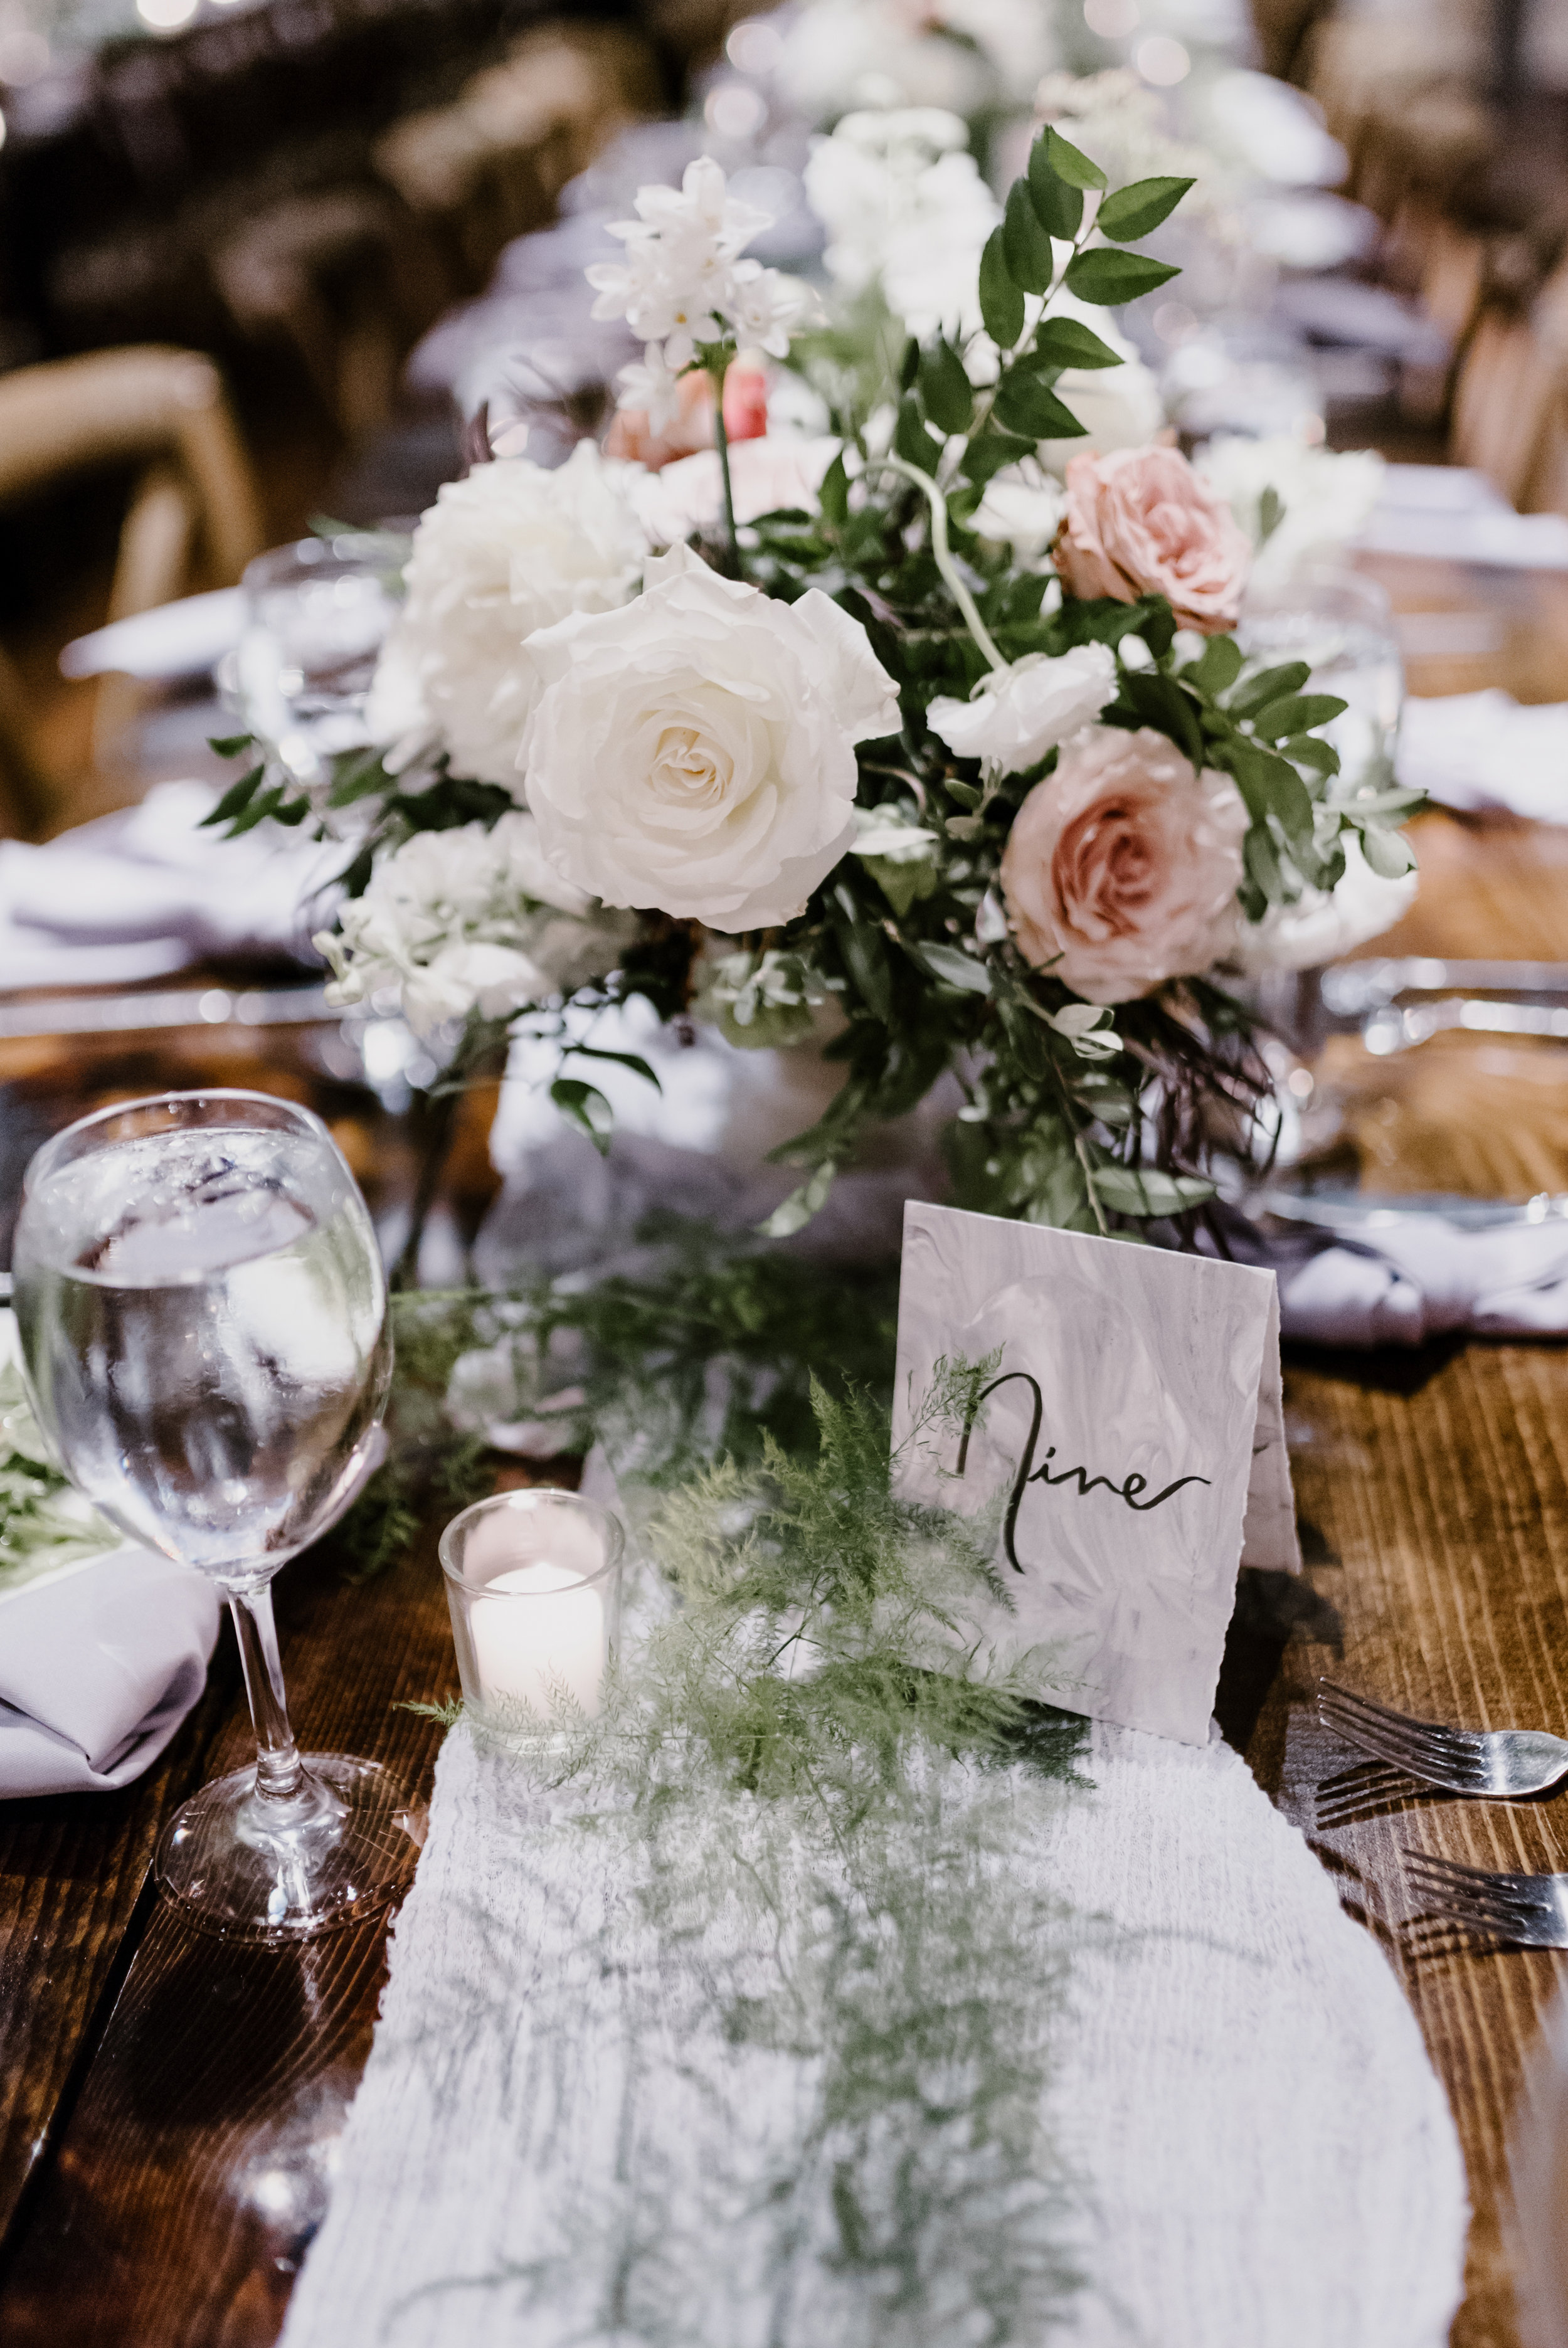 Low, overflowing centerpiece with soft grey runners and light, airy greenery // Cordelle Wedding Flowers